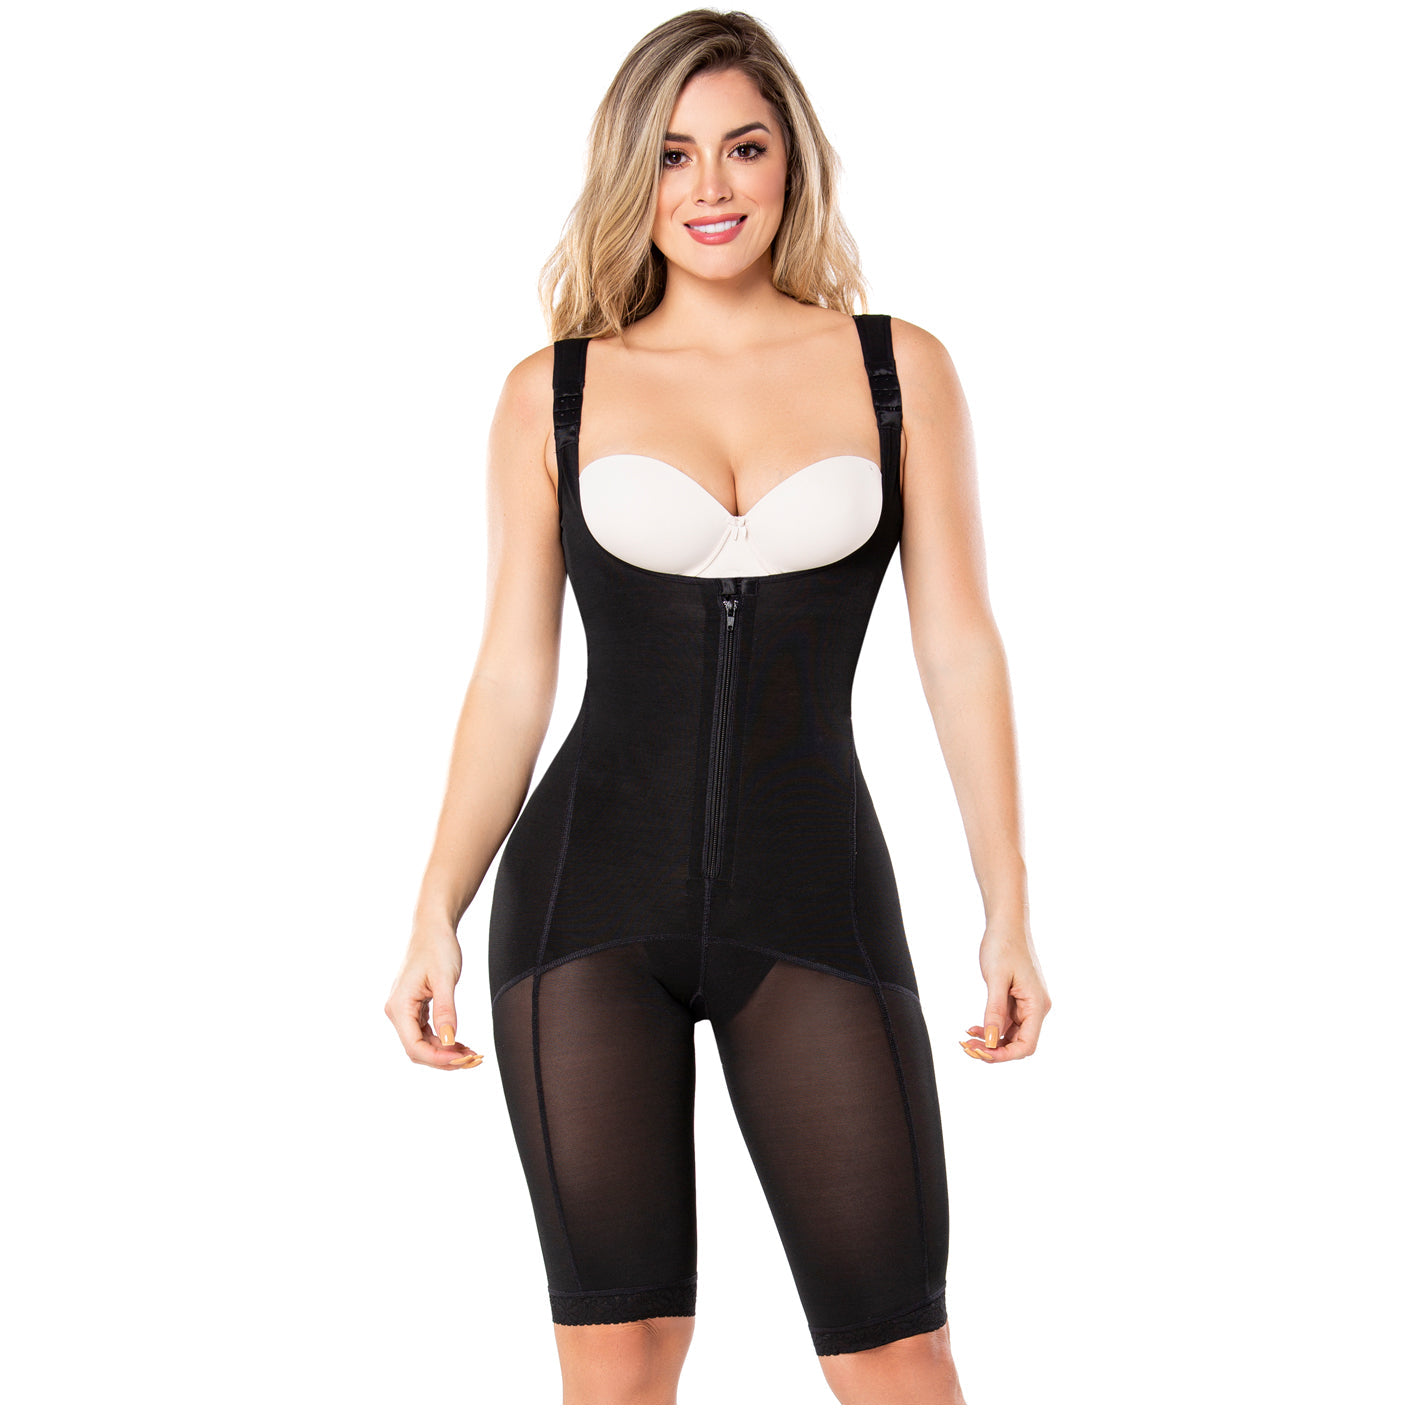 Daily Use Full Body Shaper | Postsurgical Girdle | Diane and Geordi Fajas  2397